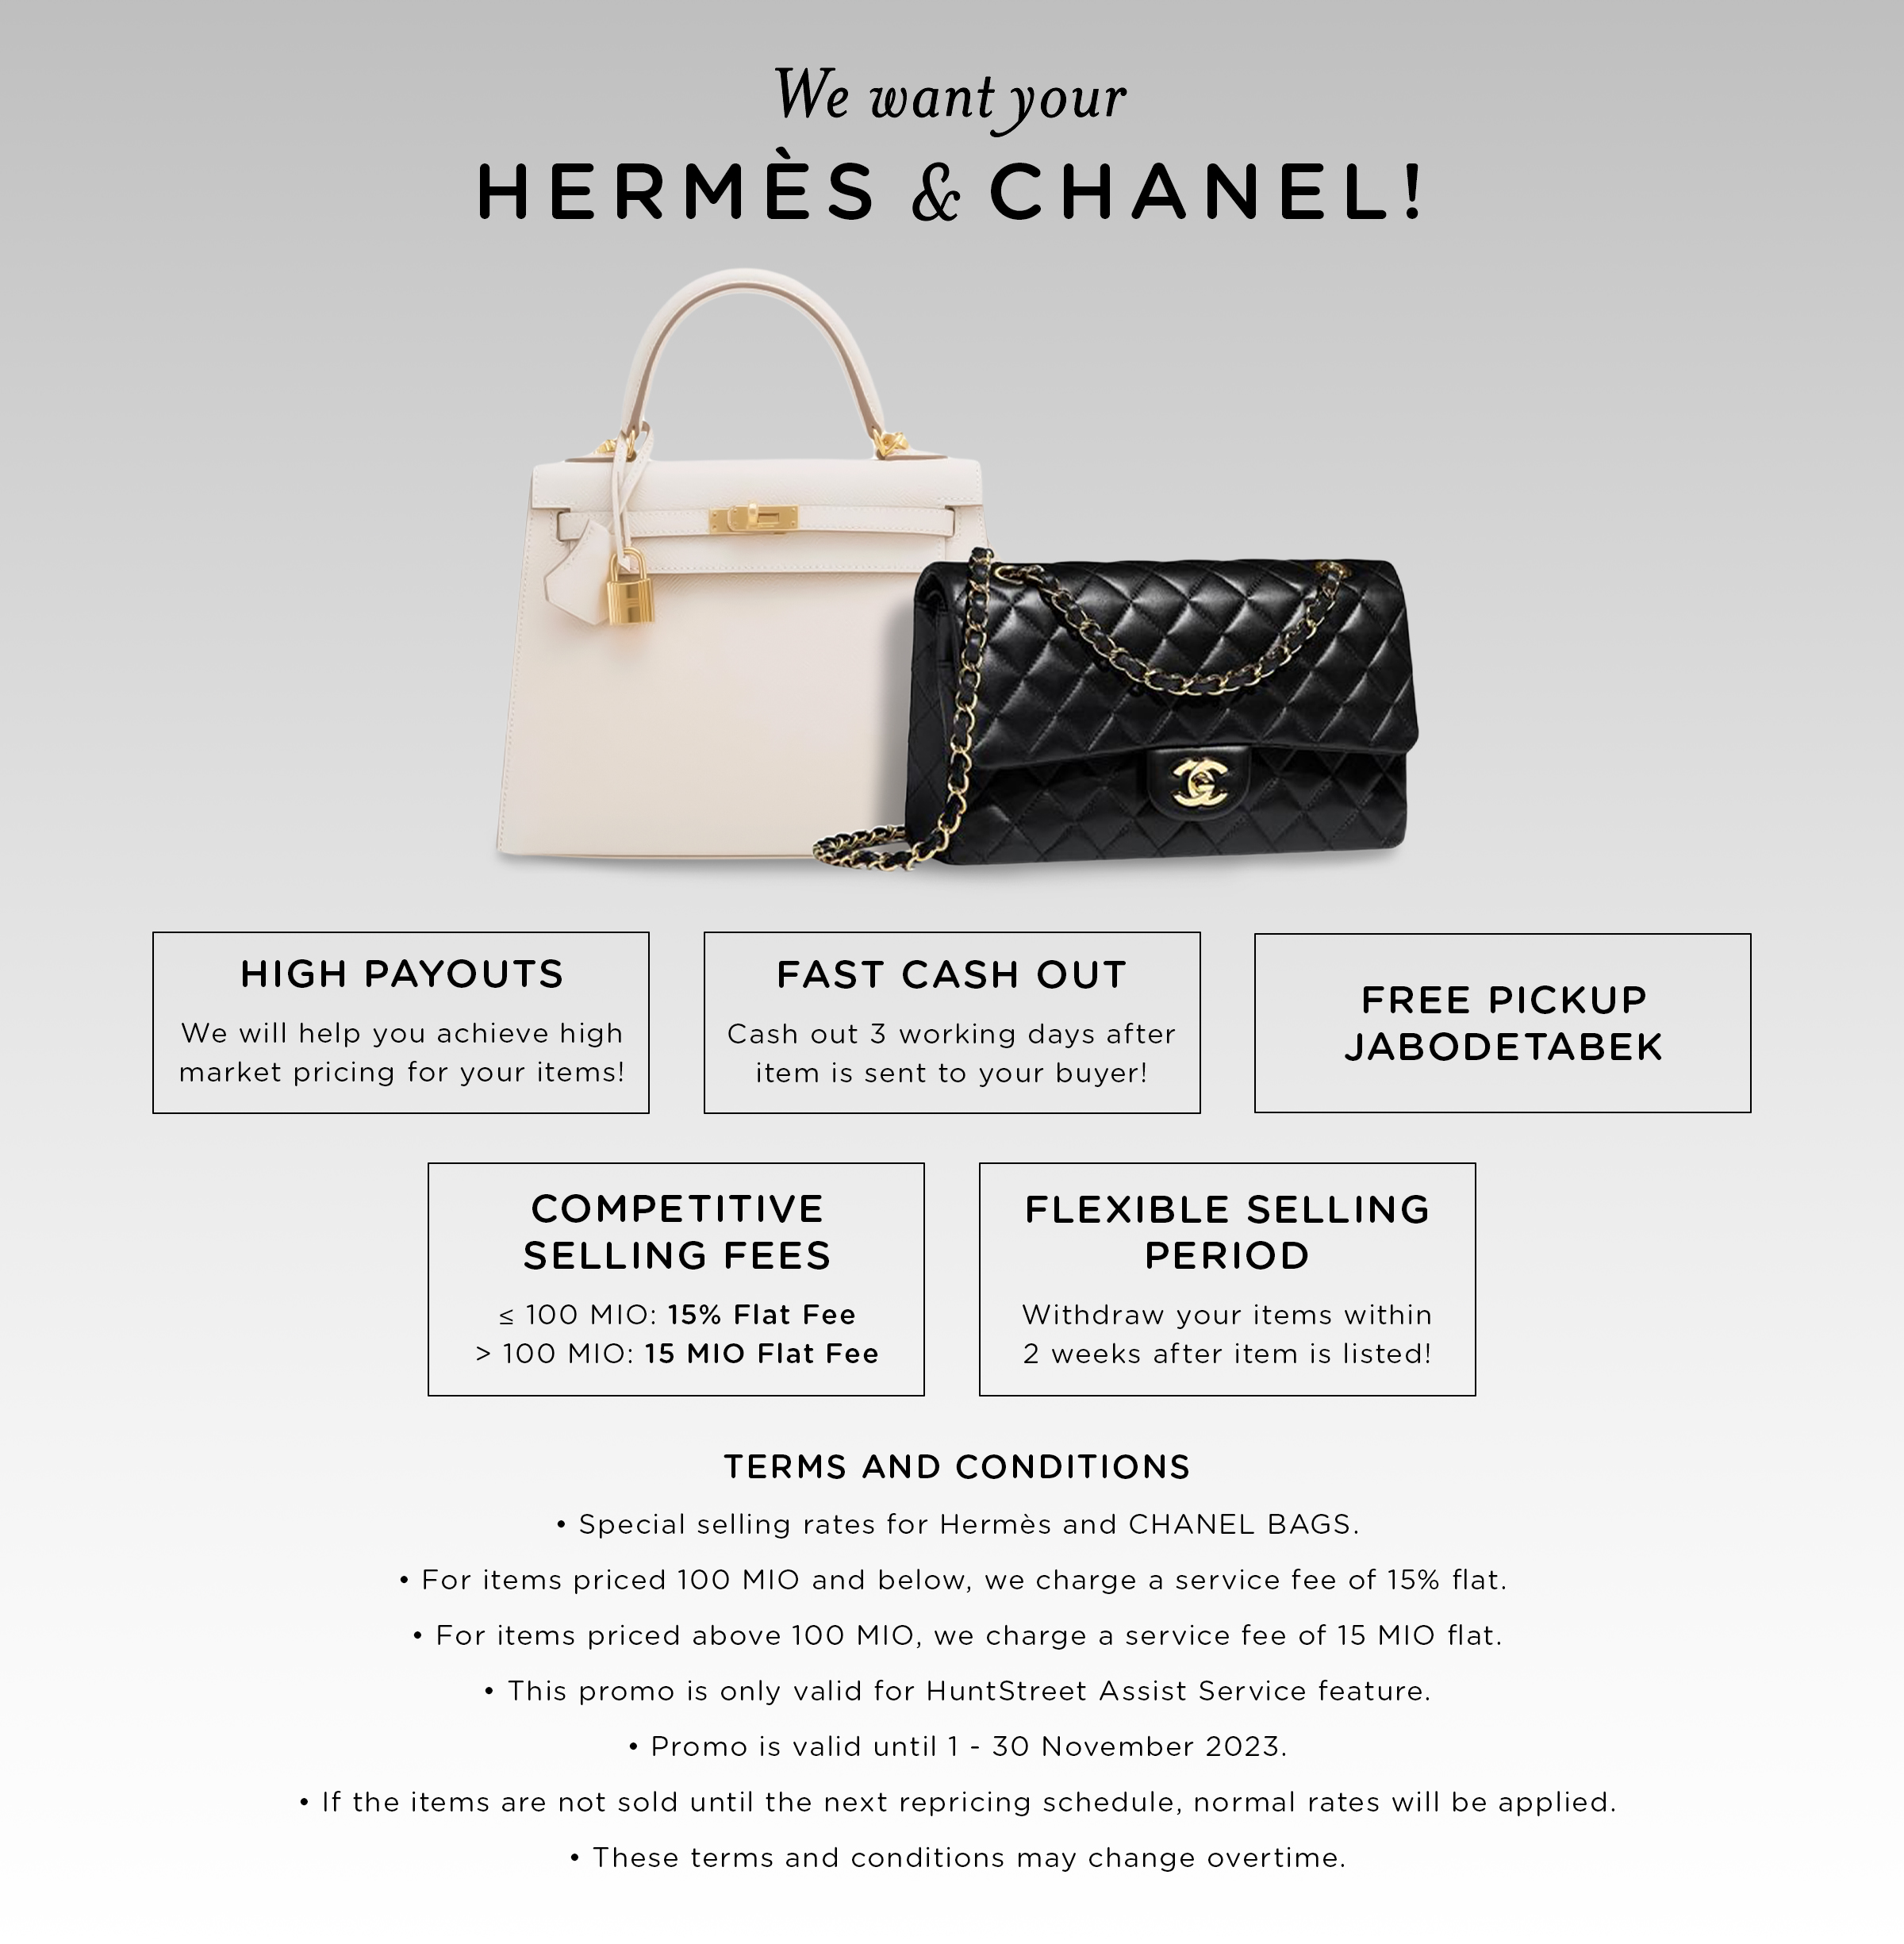 We Want Your Hermes and Chanel